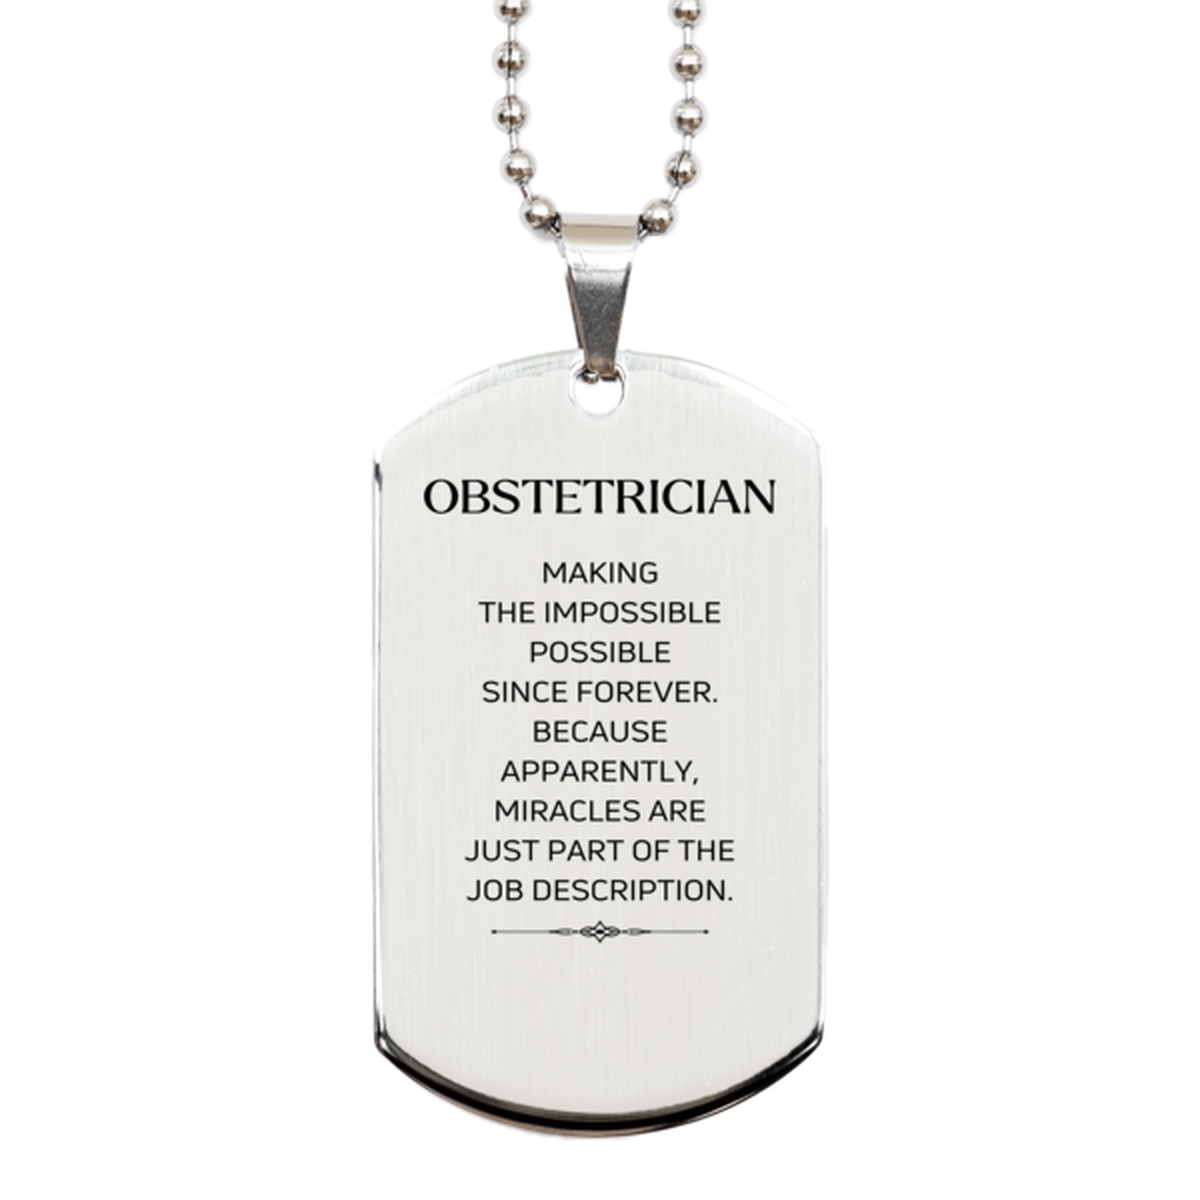 Funny Obstetrician Gifts, Miracles are just part of the job description, Inspirational Birthday Silver Dog Tag For Obstetrician, Men, Women, Coworkers, Friends, Boss